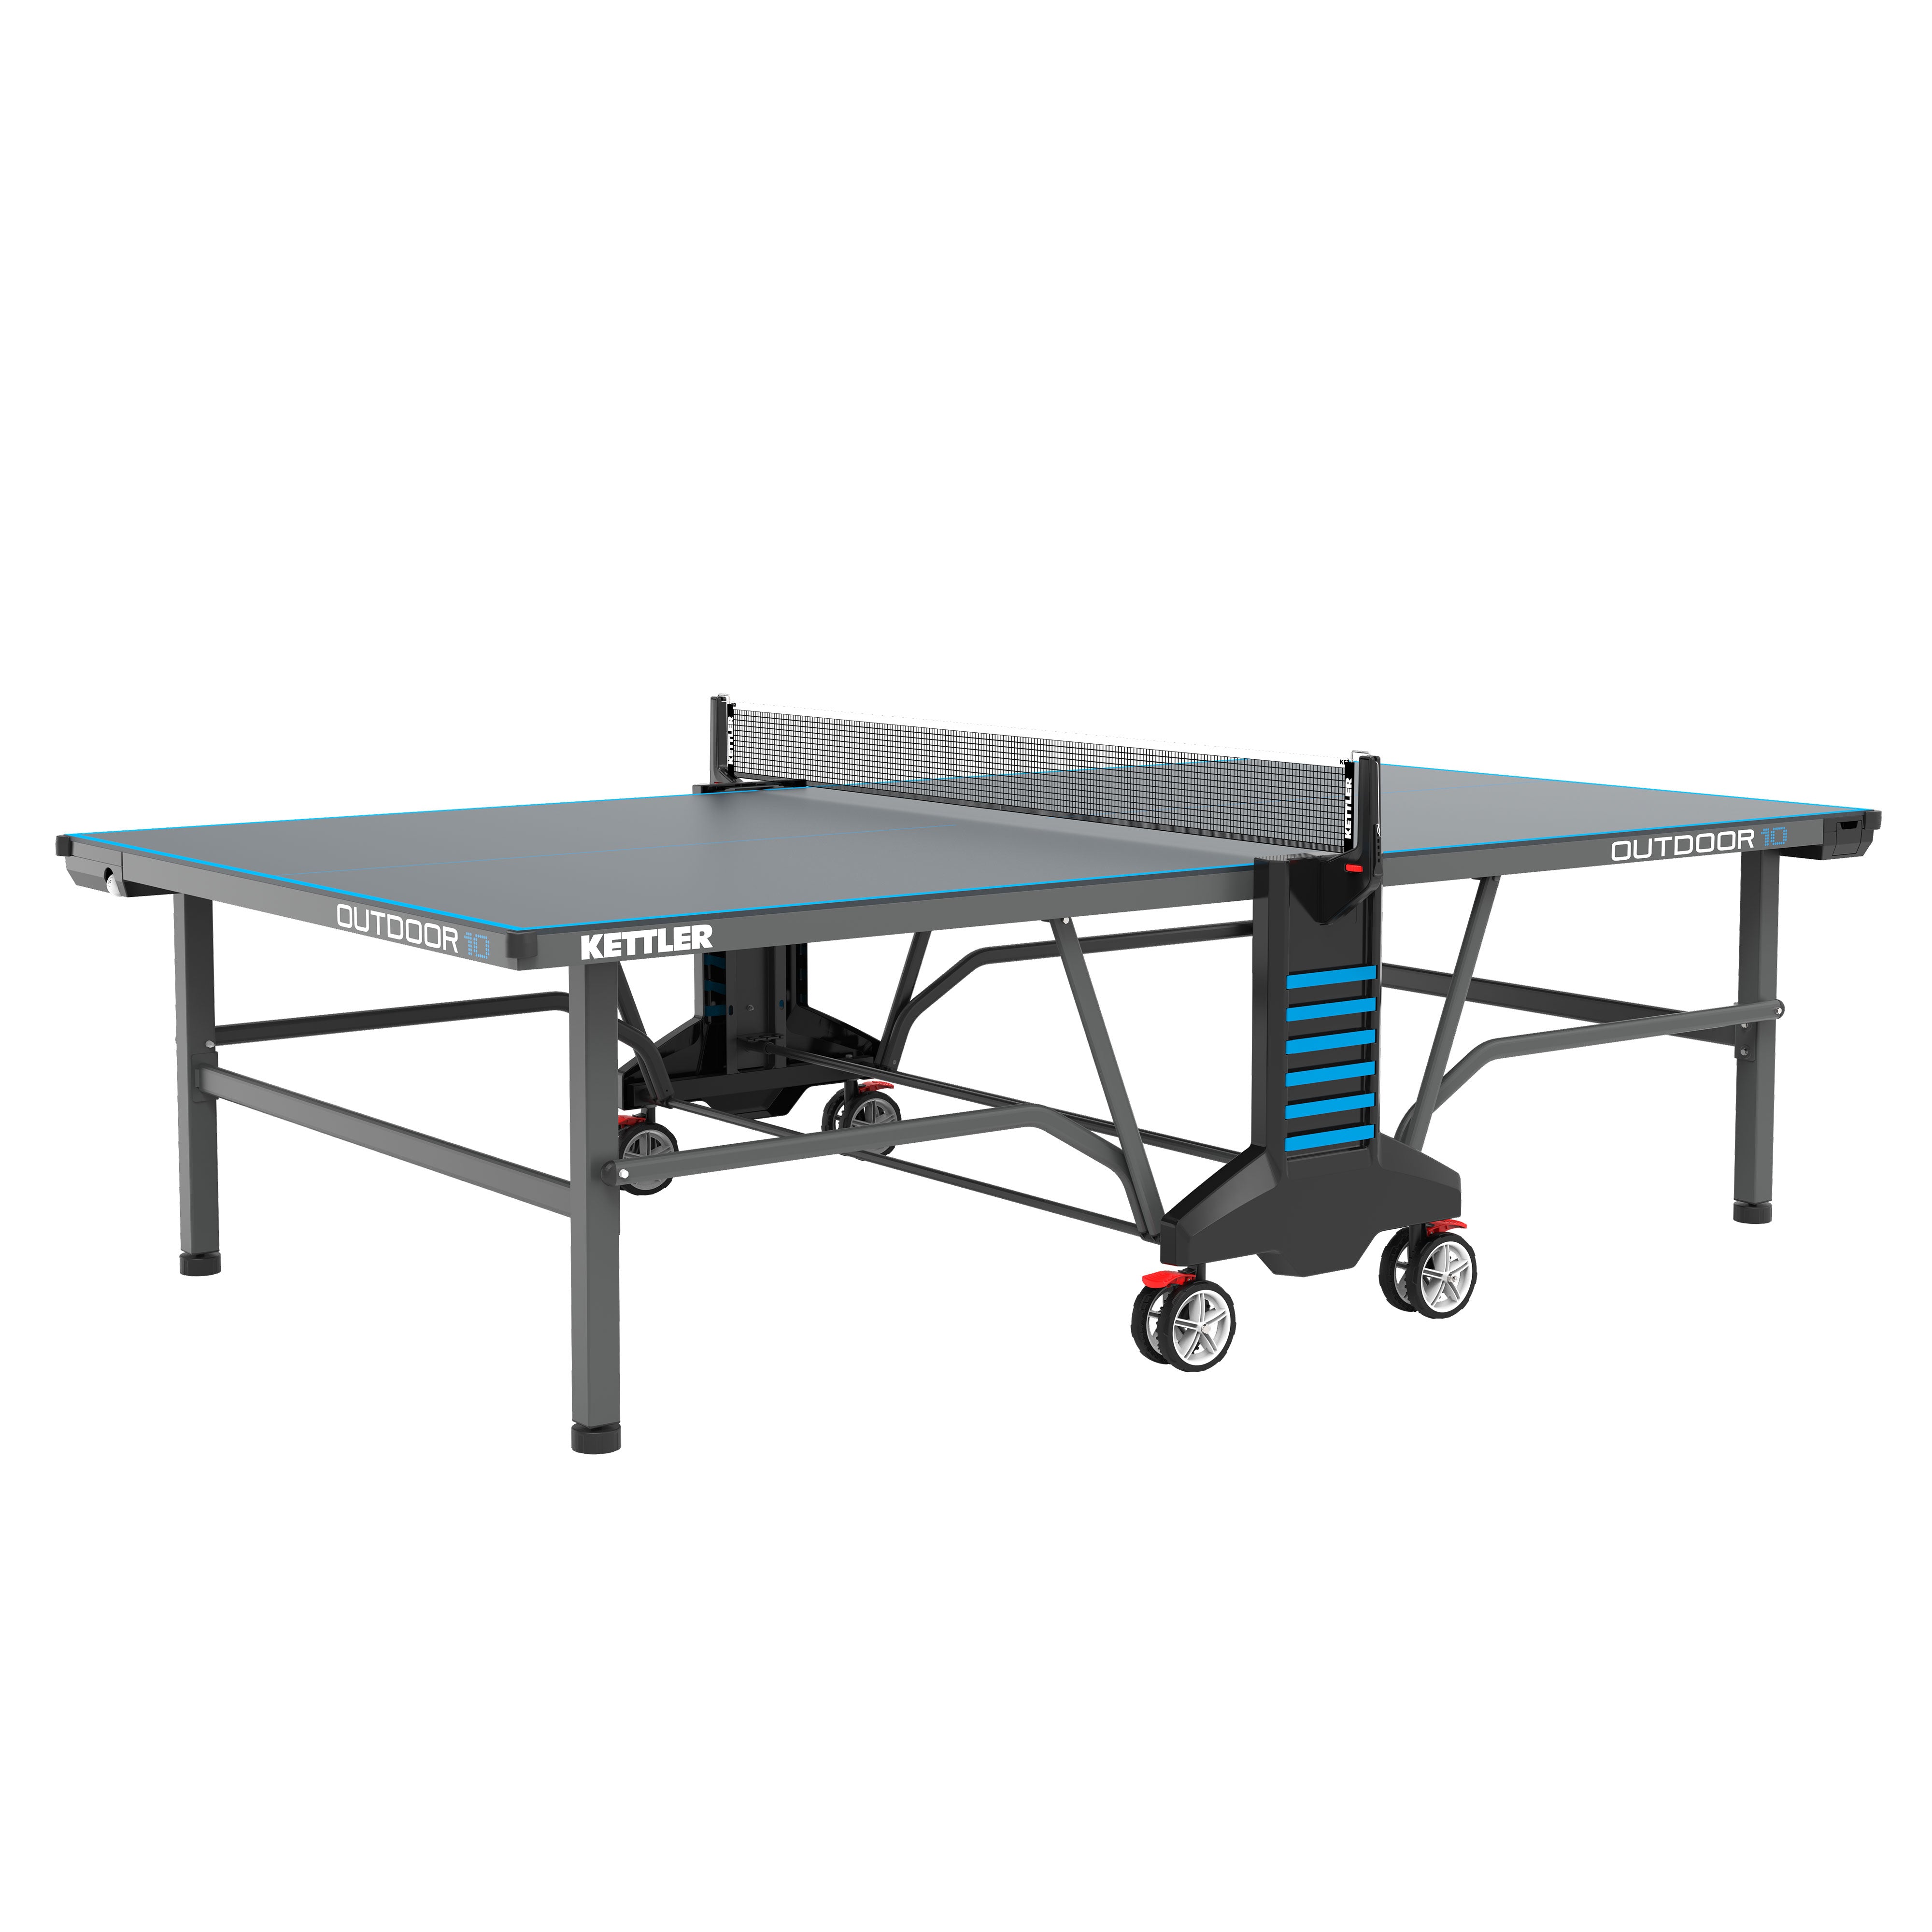 Outdoor 10 Table Tennis Table